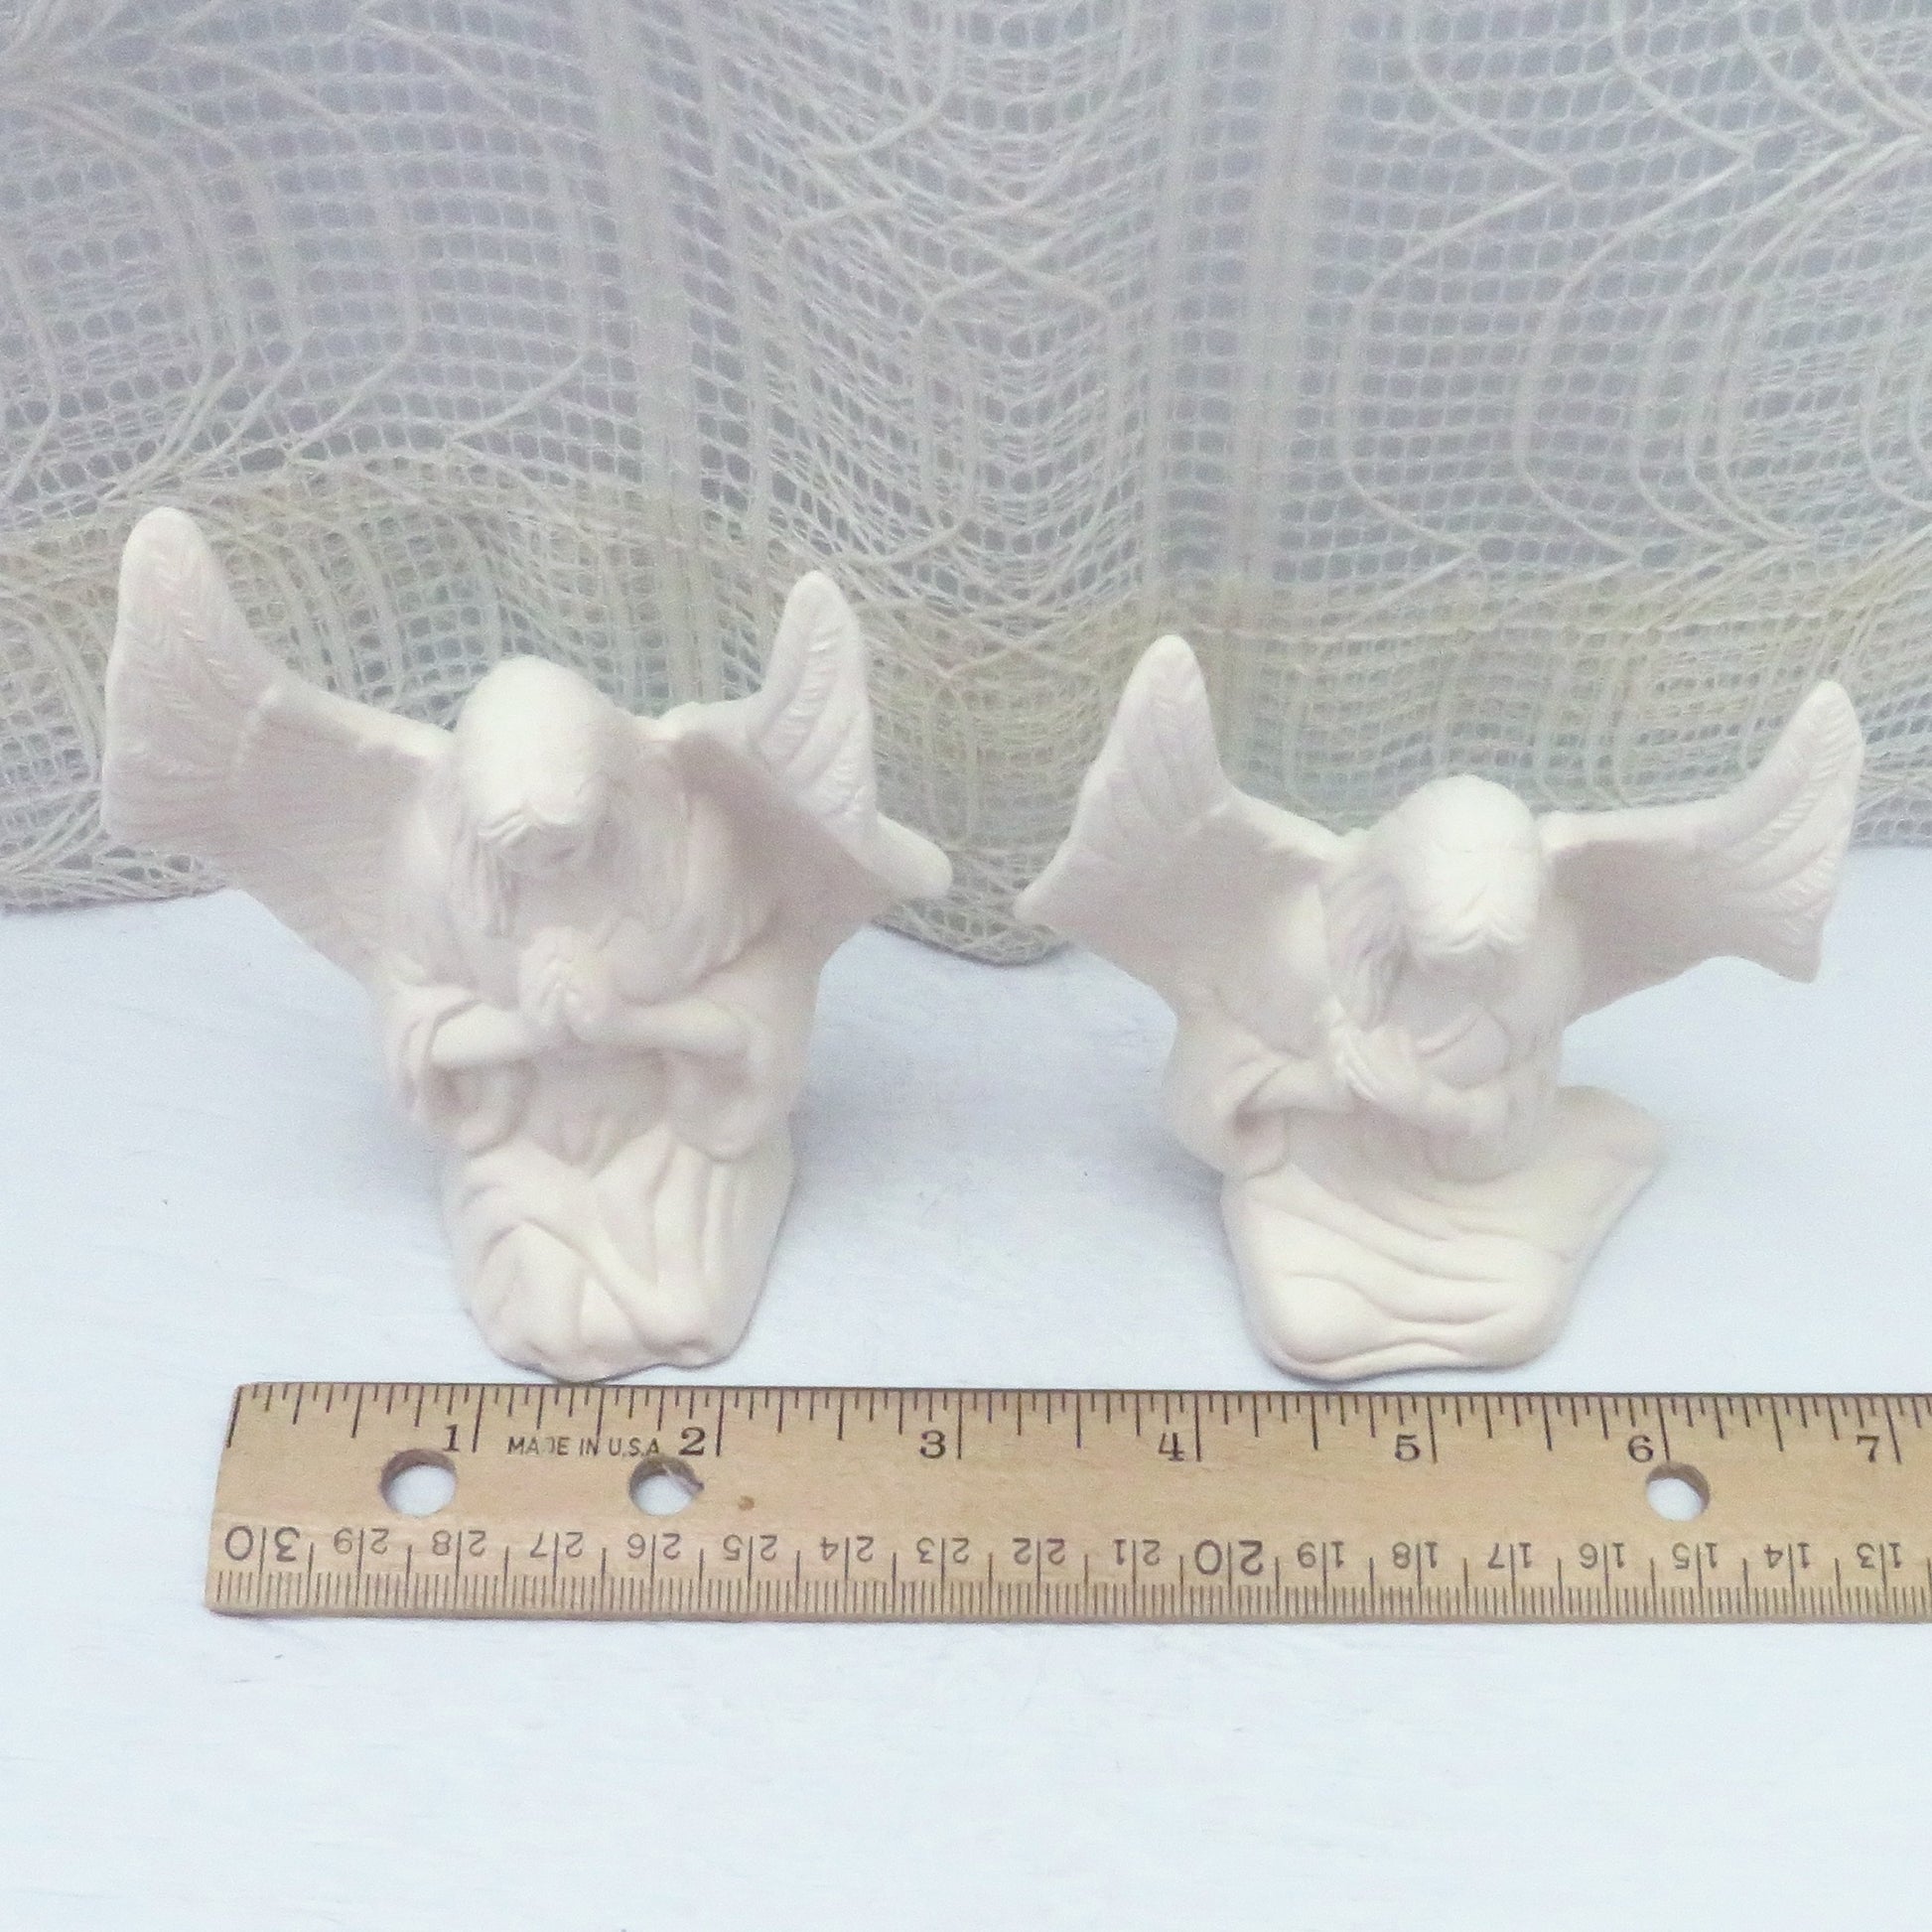 Handmade DIY ceramic angel figurines near a ruler showing them to be approximately 3 inches wide.  This is a top view looking down.